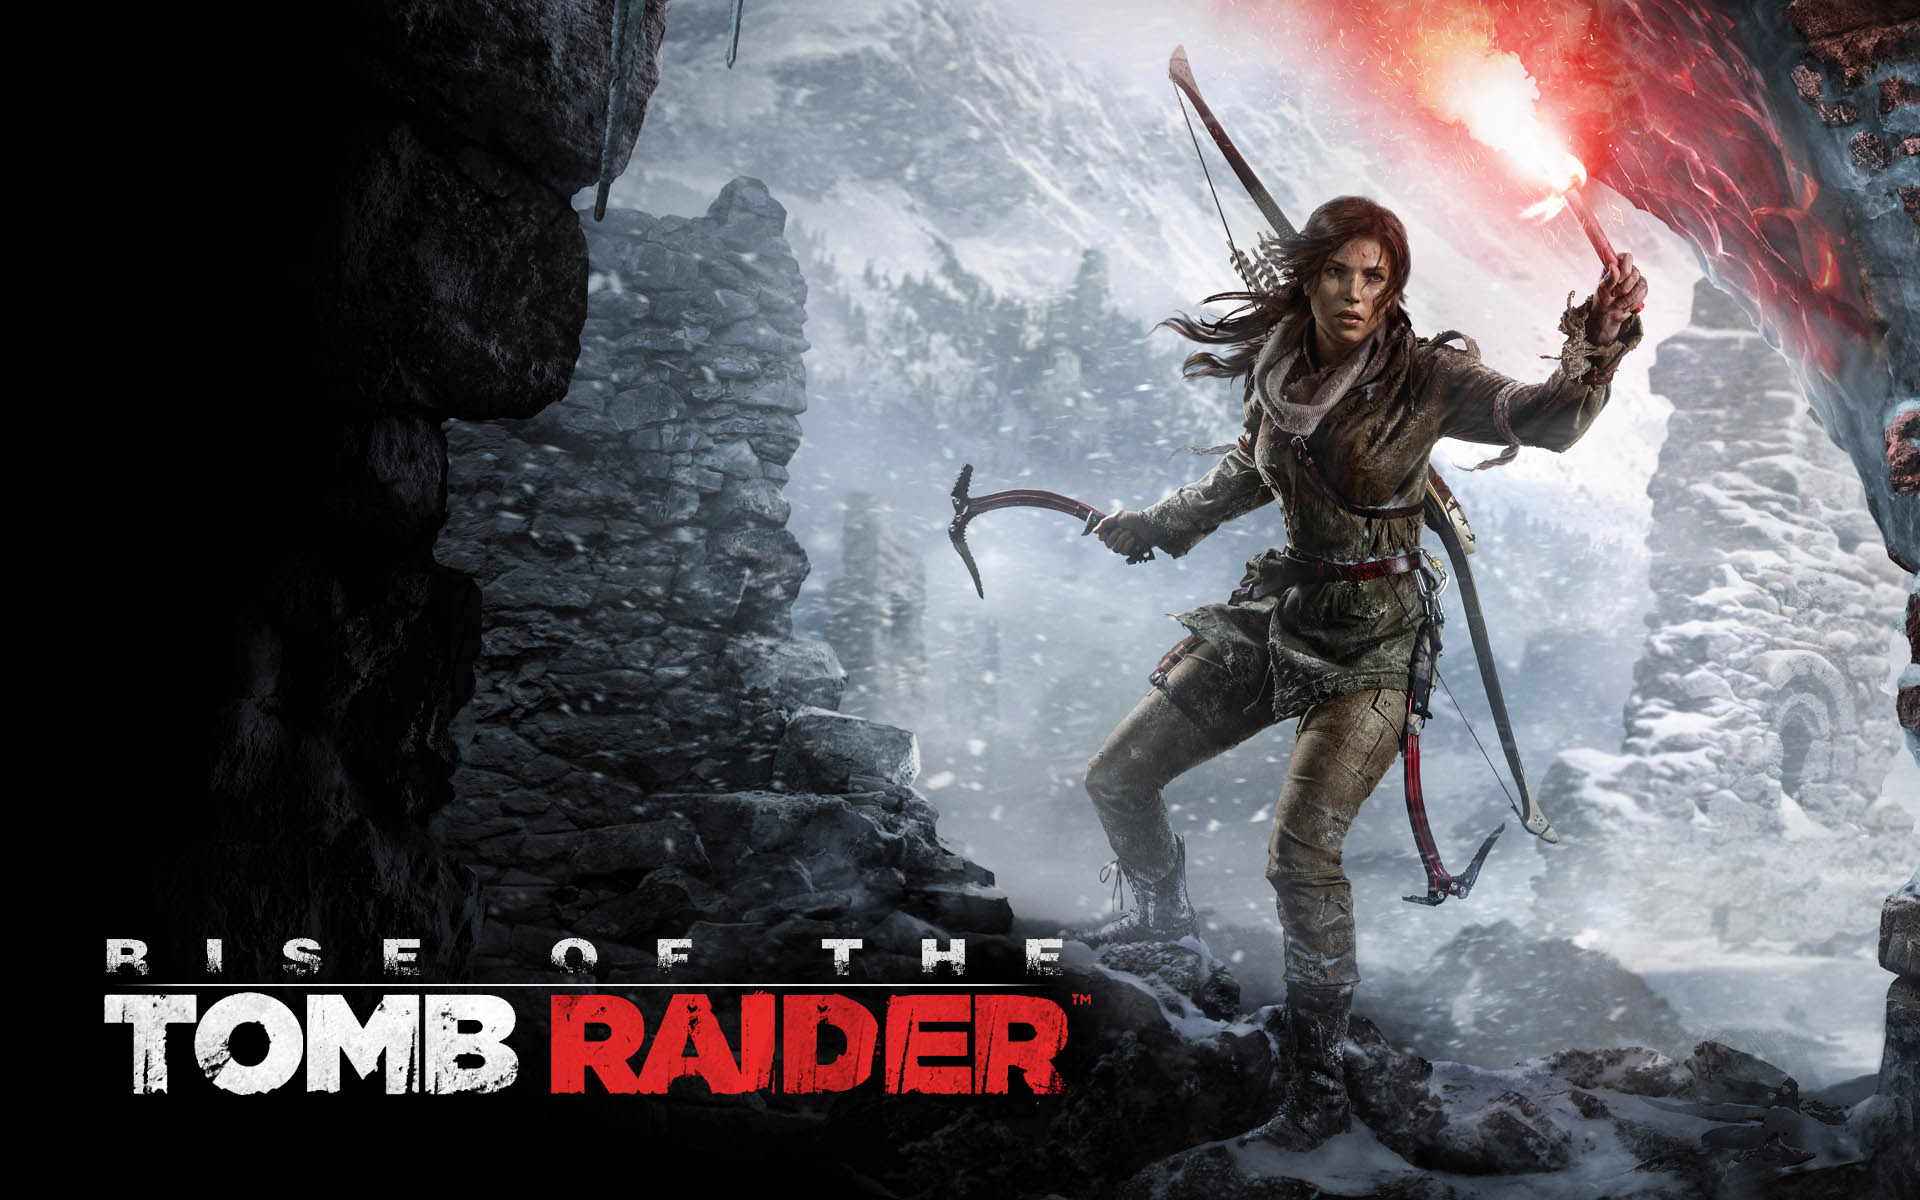 “Rise of the Tomb Raider” PC Launch Date Leaked - That Was Fast